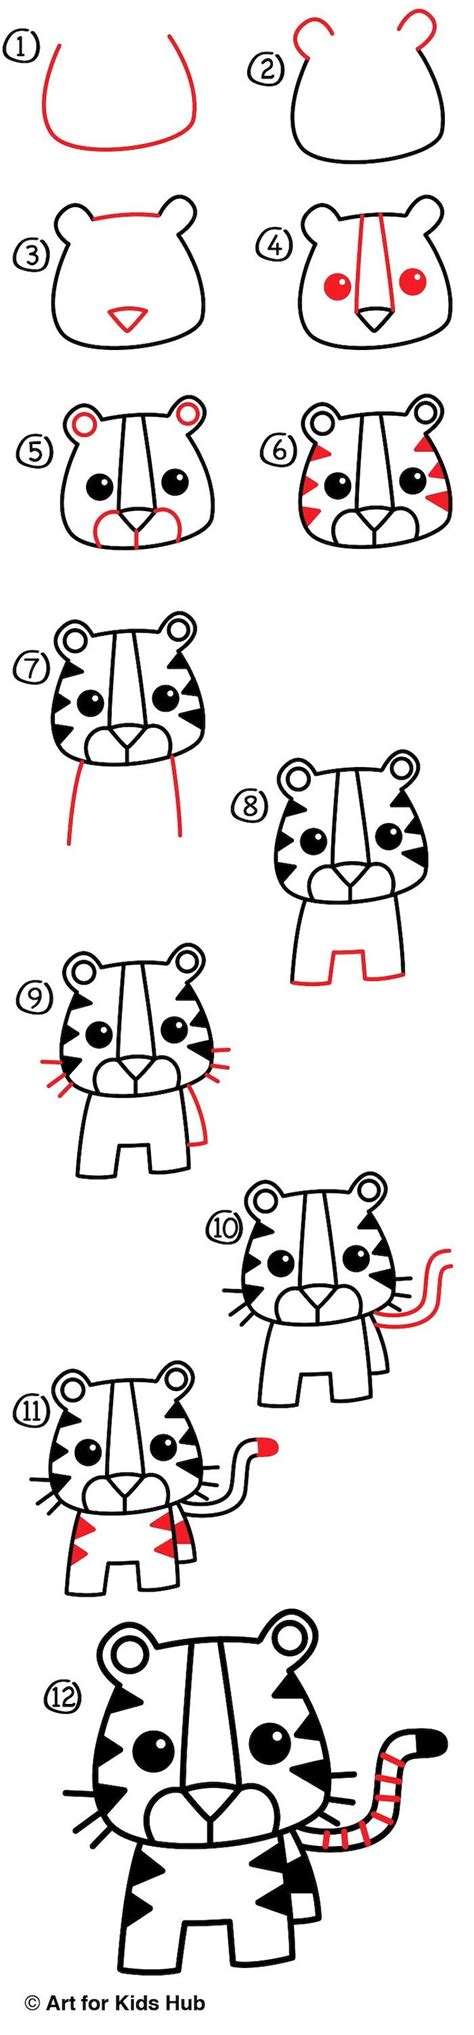 How To Draw A Cartoon Tiger In Easy Steps For Beginners Cartoonists